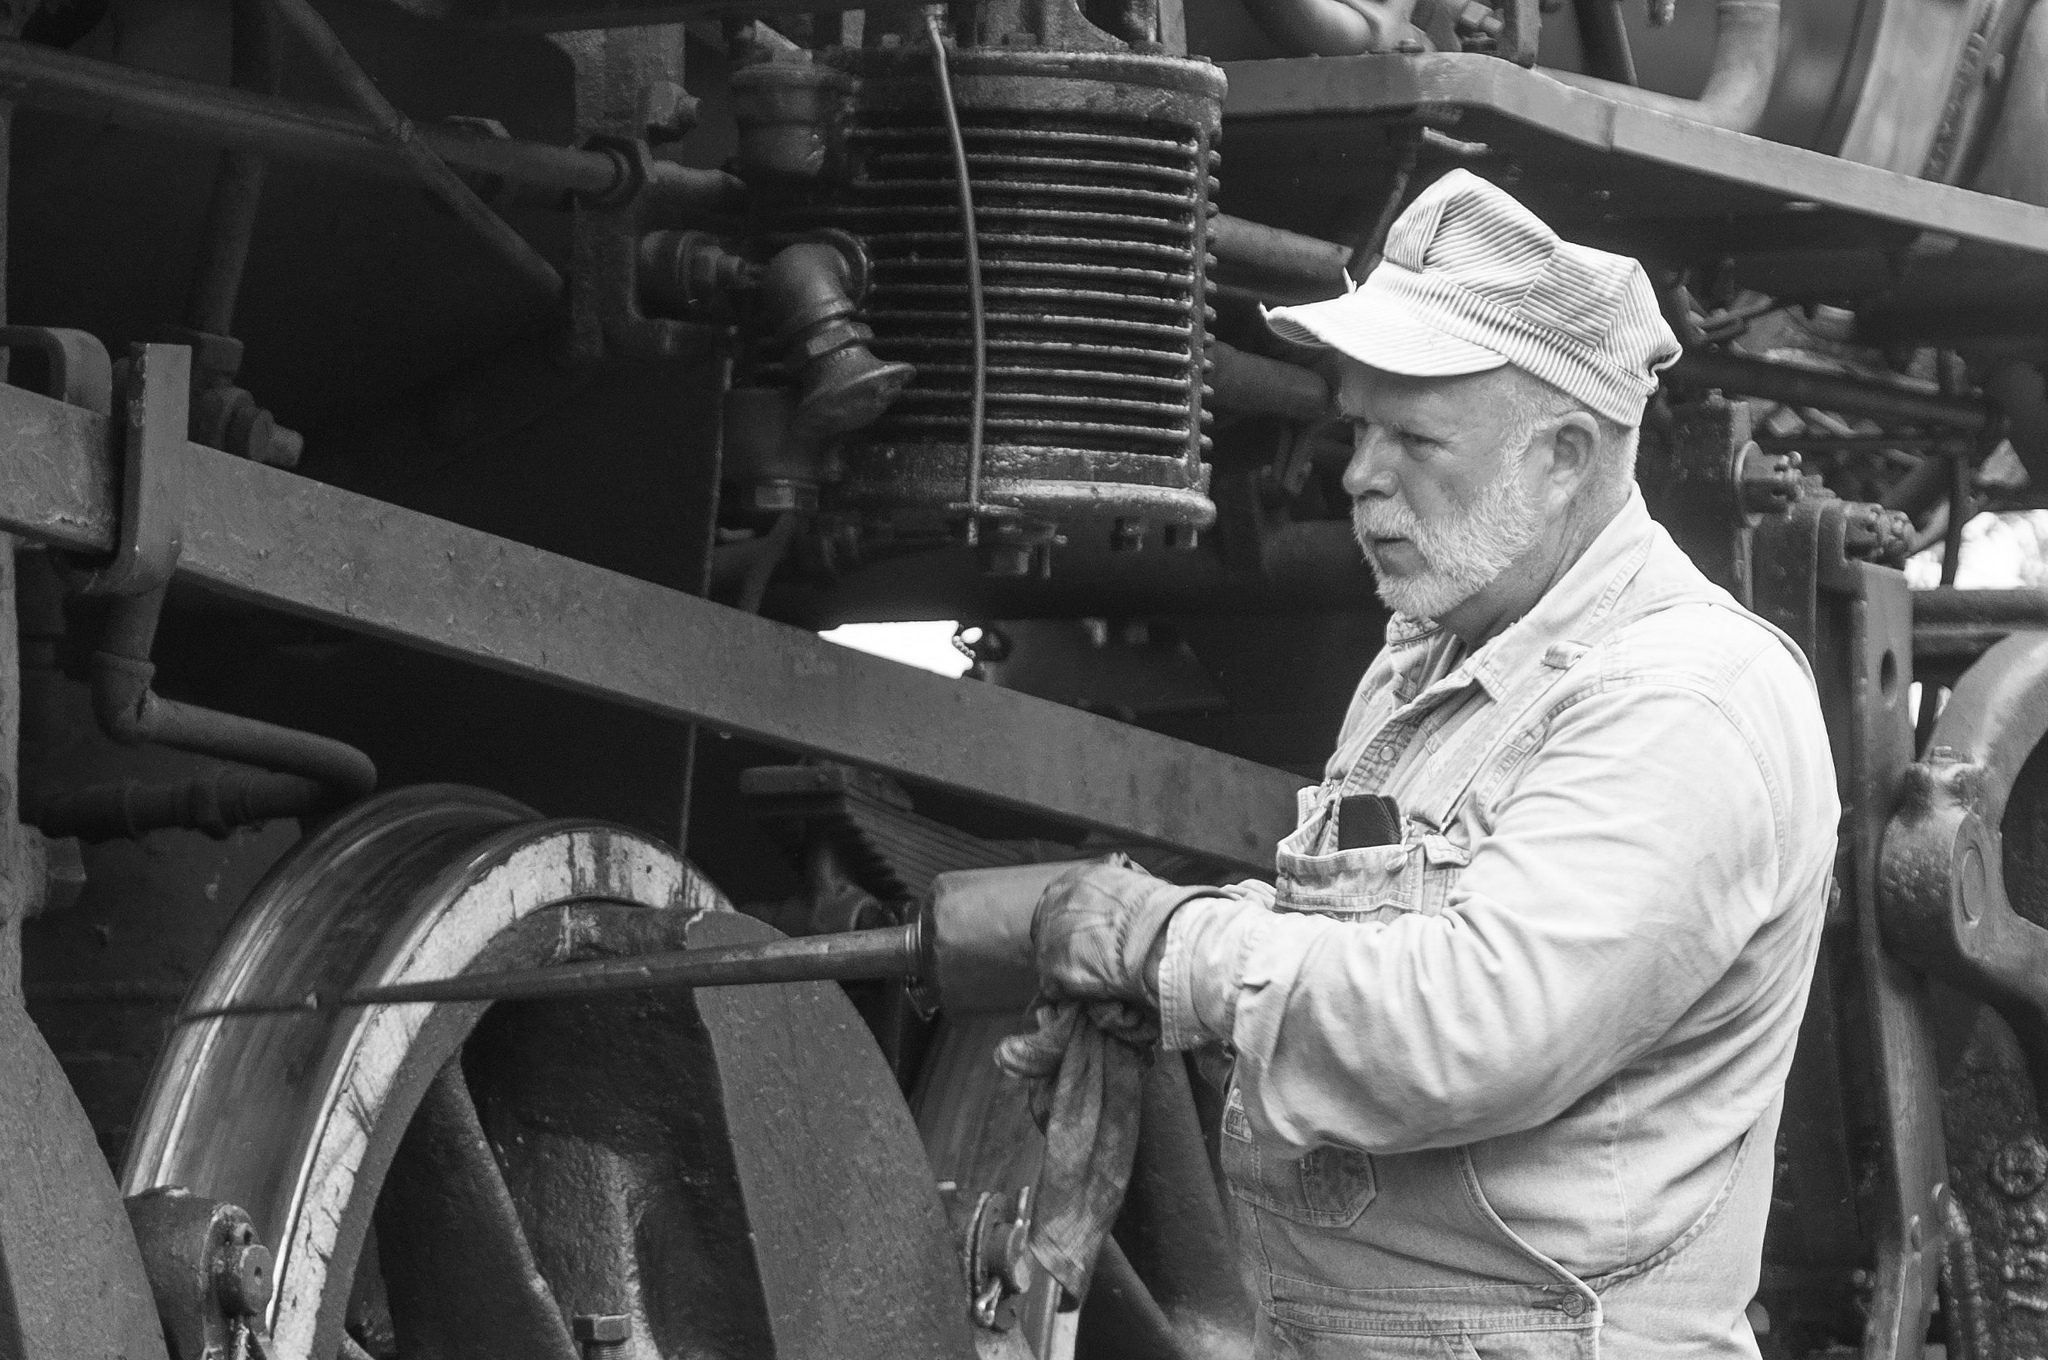 An old railroad engineer tuning up a locomotive, published as part of "Complete Guide to Launching a WordPress Site: Part 2 (Maintenance)"